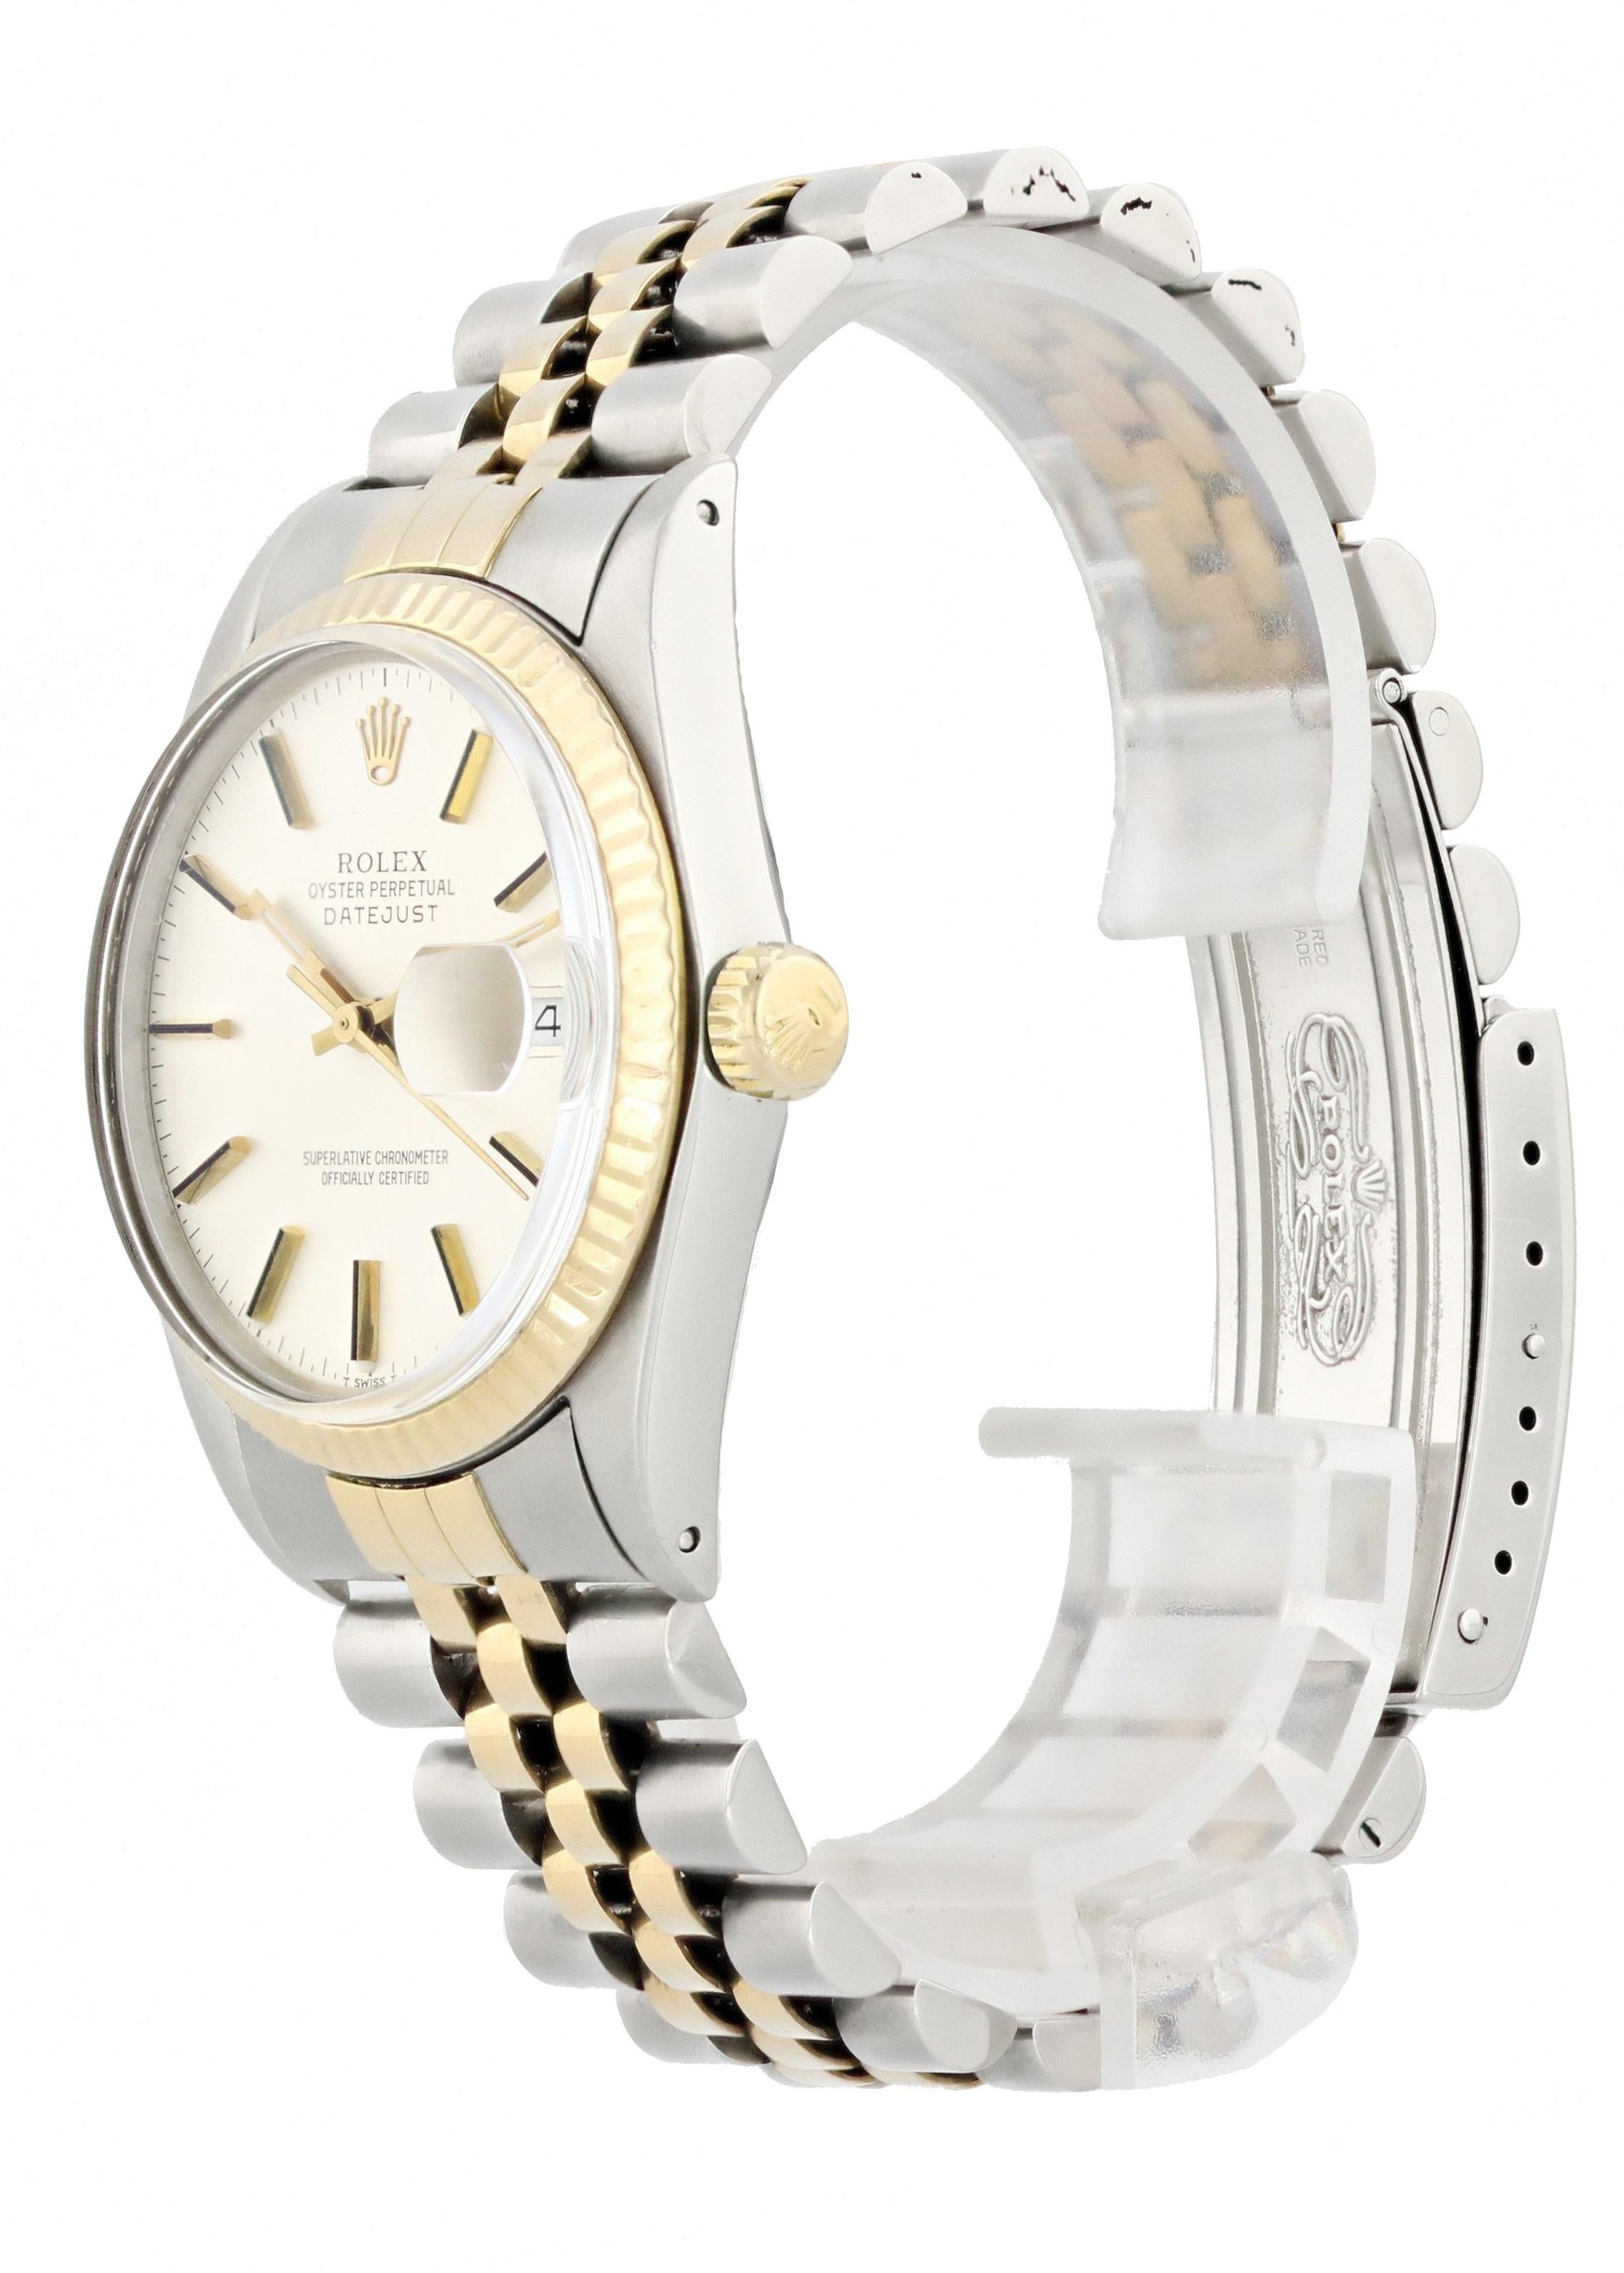 Rolex Datejust 16013 Men Watch. 
36mm Stainless Steel case. 
Yellow Gold Stationary bezel. 
Silver dial with Luminous gold hands and index hour markers. 
Minute markers on the outer dial. 
Date display at the 3 o'clock position. 
Two Tone Stainless